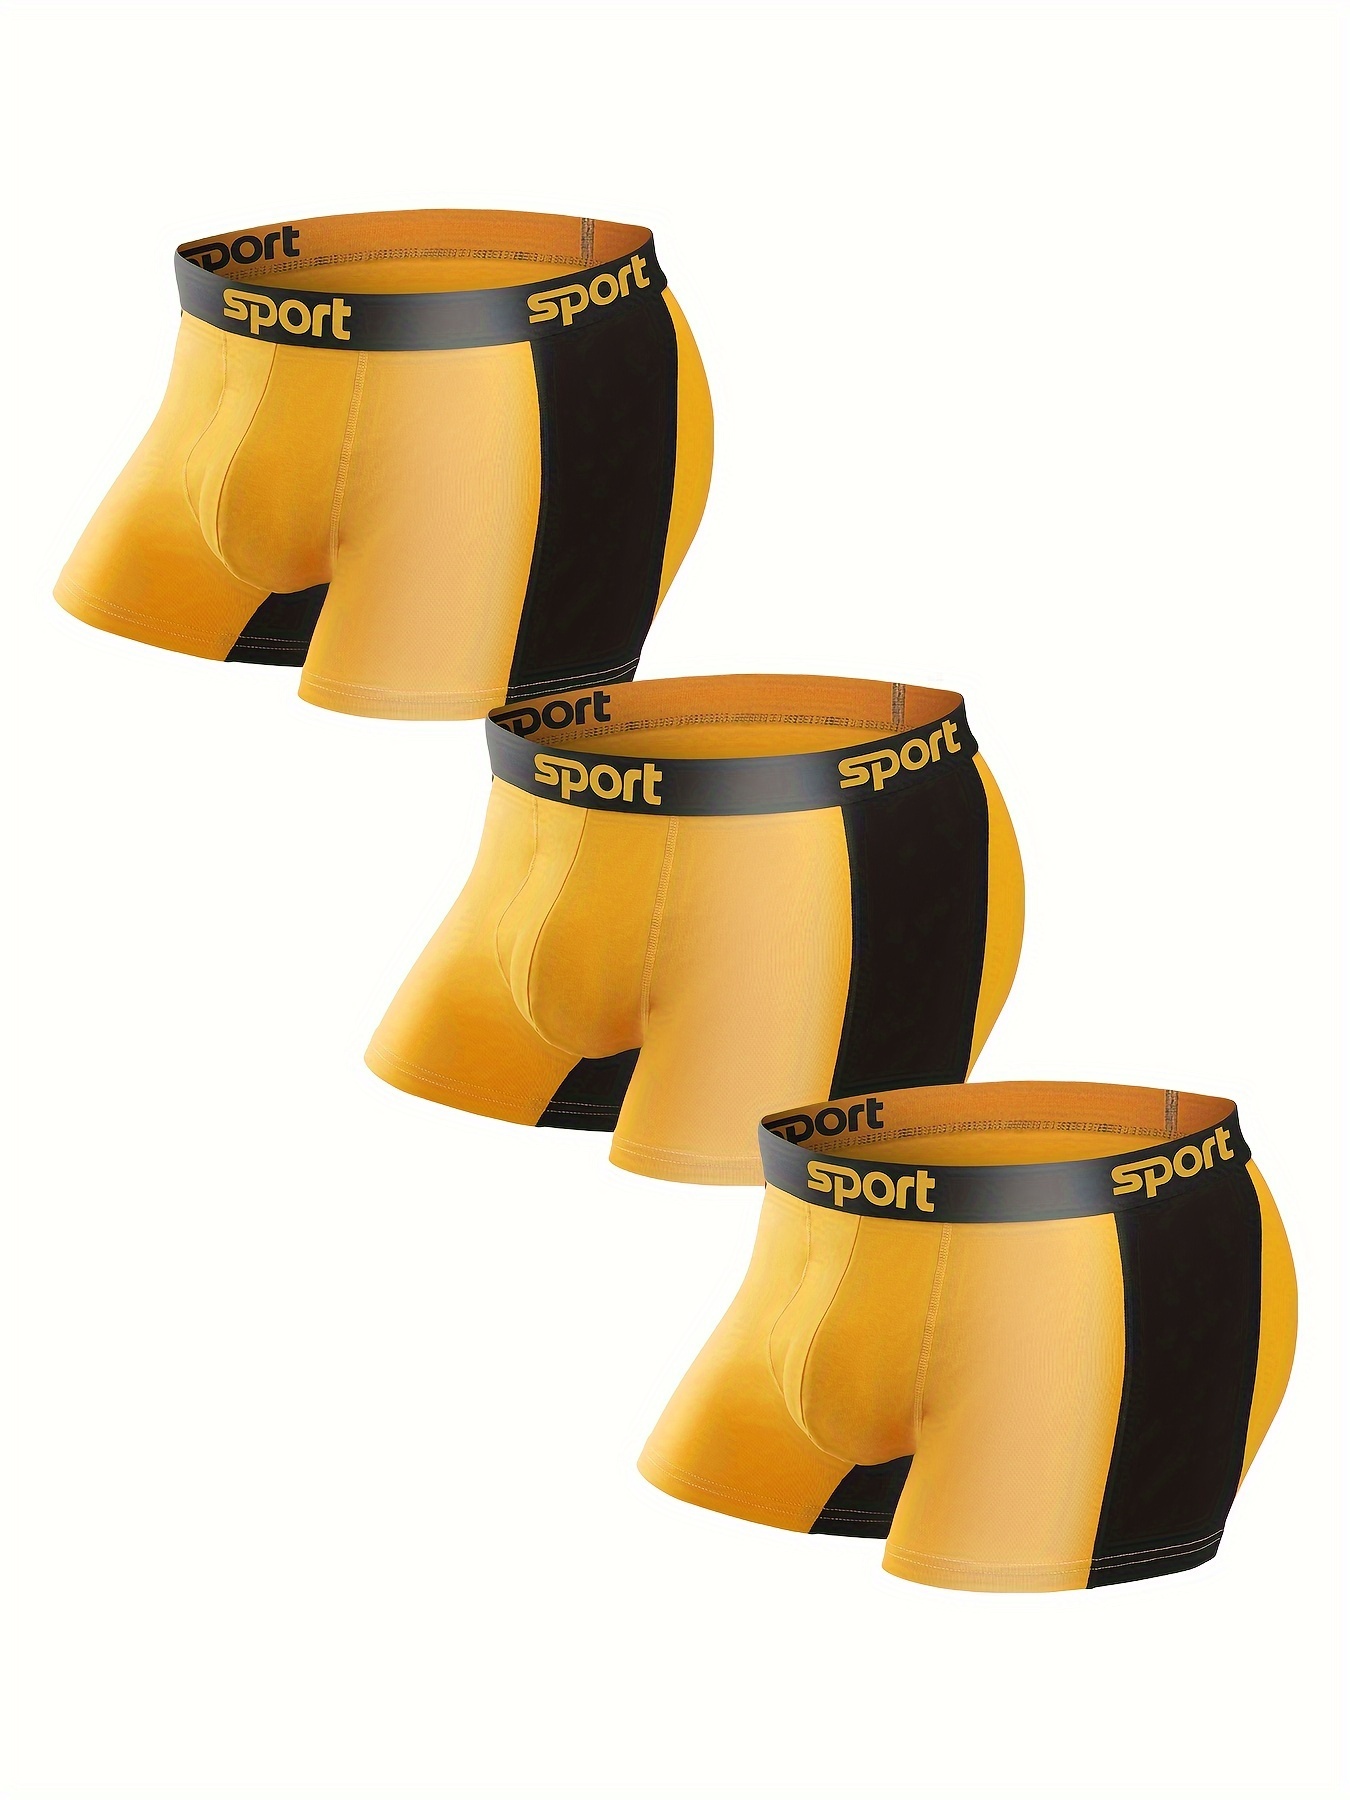 Mens Boxer Briefs Casual Fashion Sexy Colorblock Stitching Gold